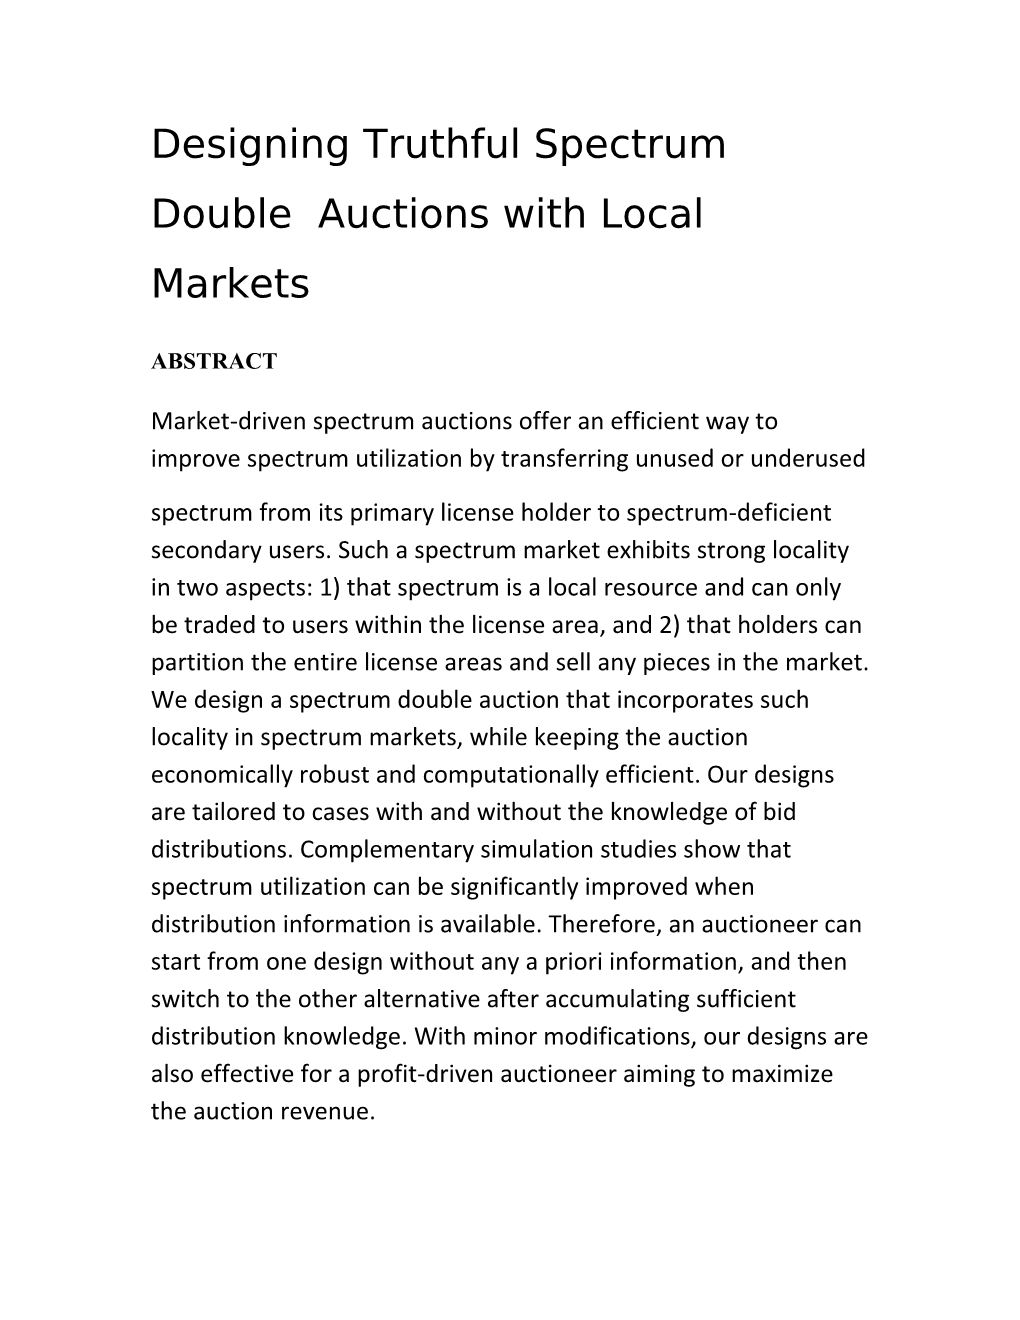 Designing Truthful Spectrum Double Auctions with Local Markets